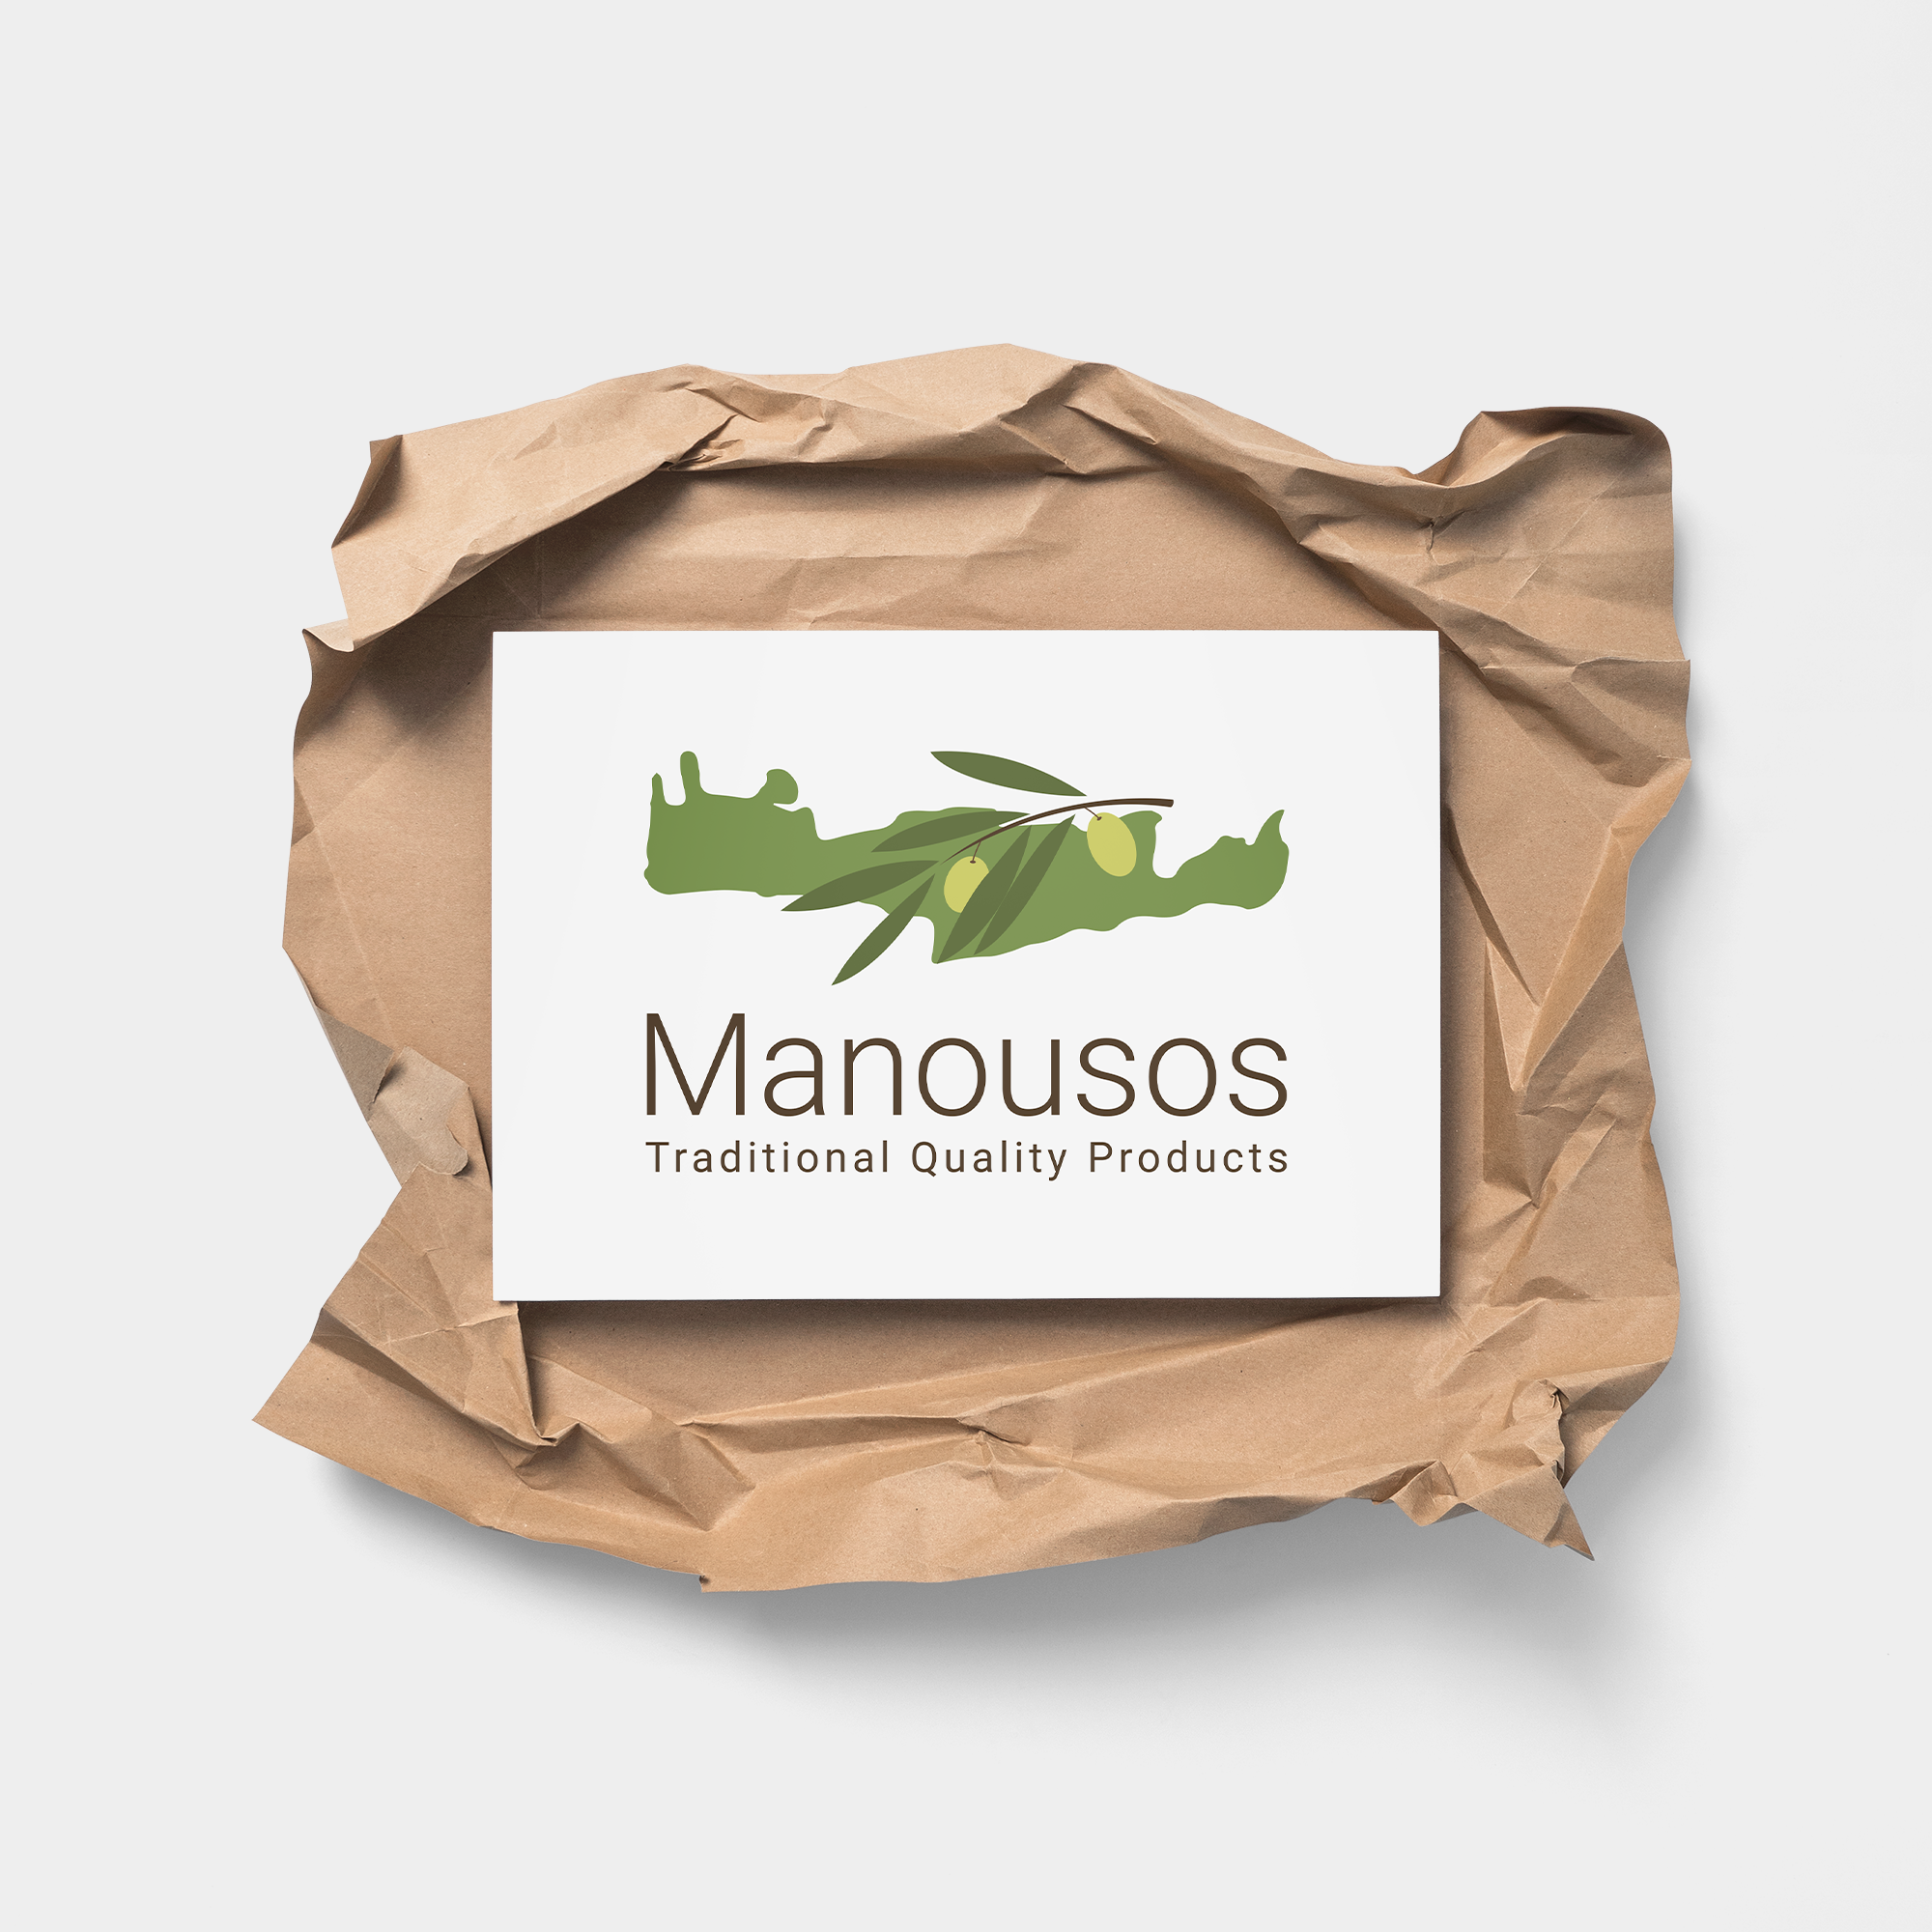 Manousos logo above a creased brown paper